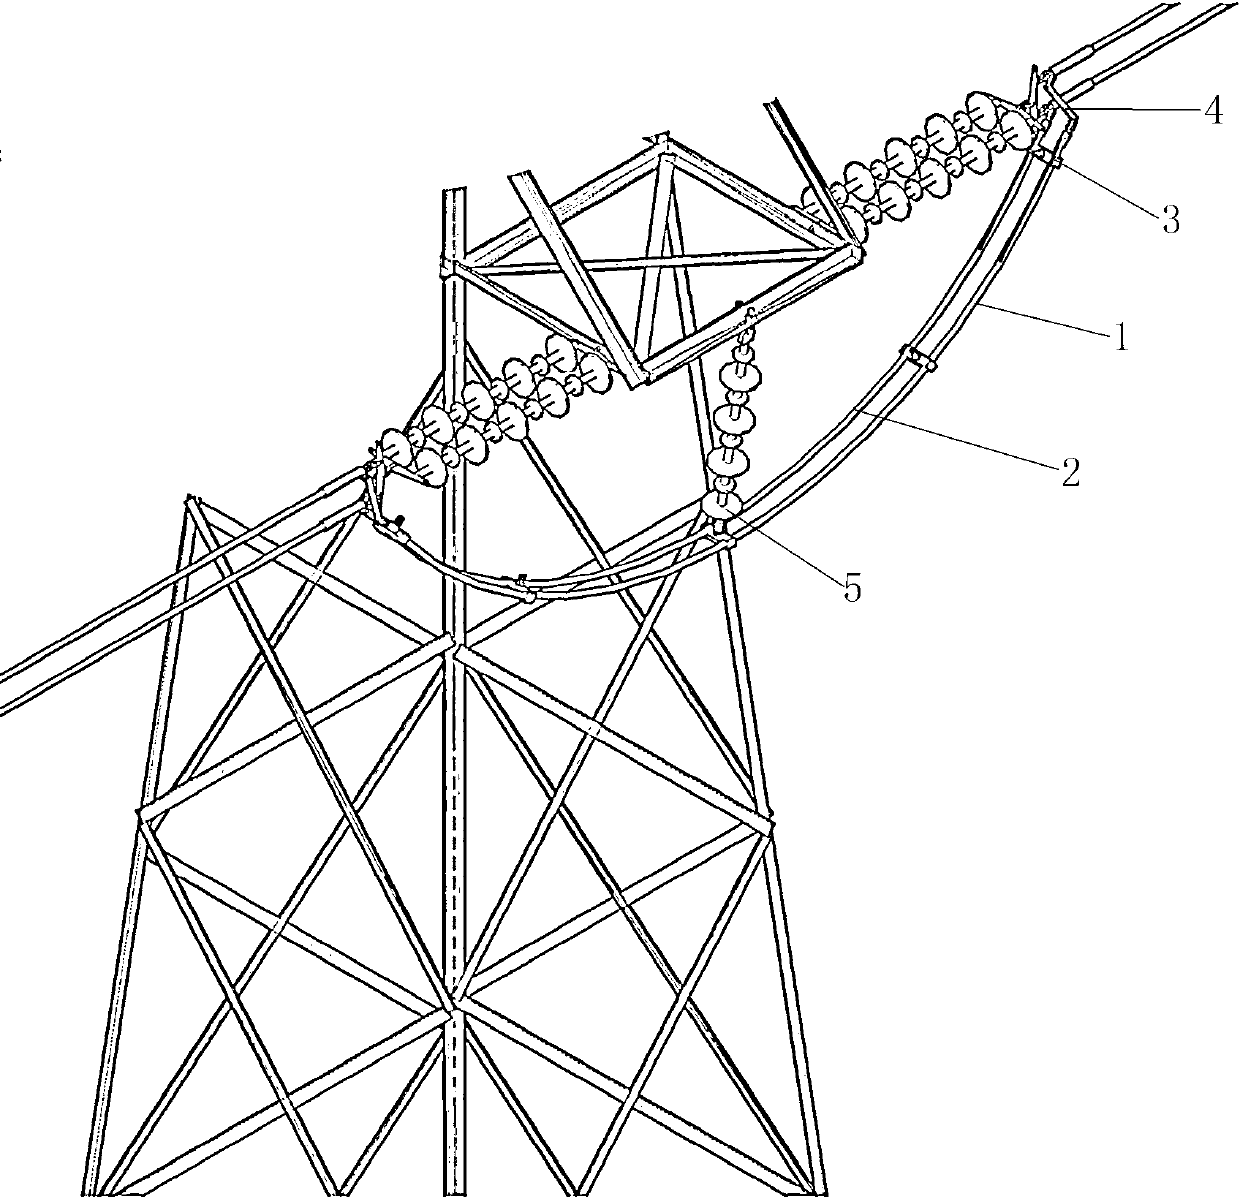 By-pass method of combined guide line of electric transmission line